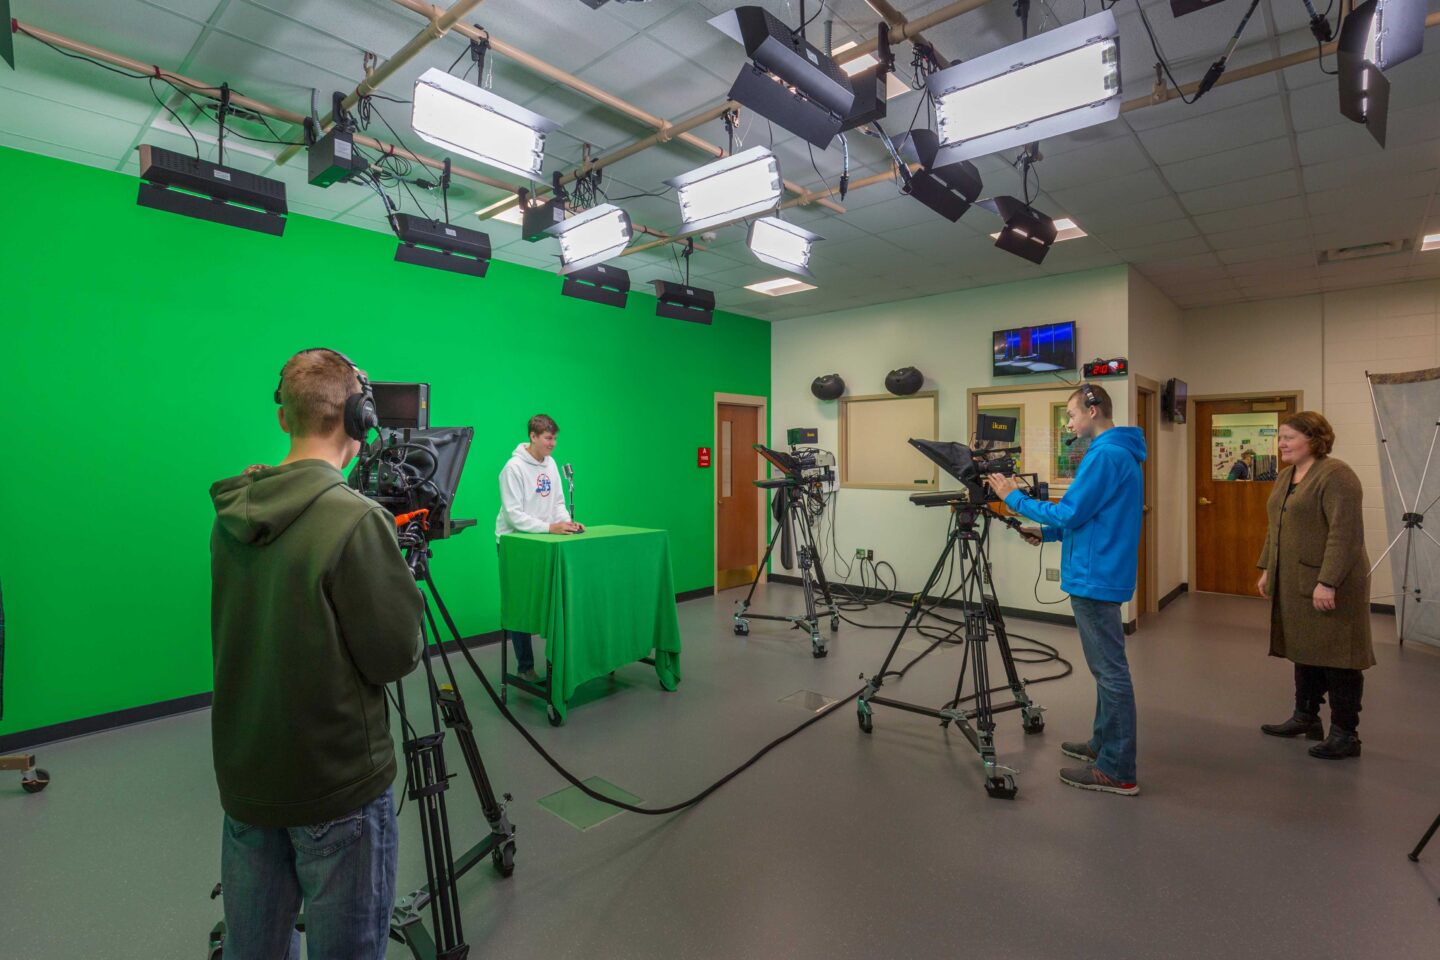 Students work behind and in front of cameras at a broadcast studio with a large green screen, located at Wausau East High School